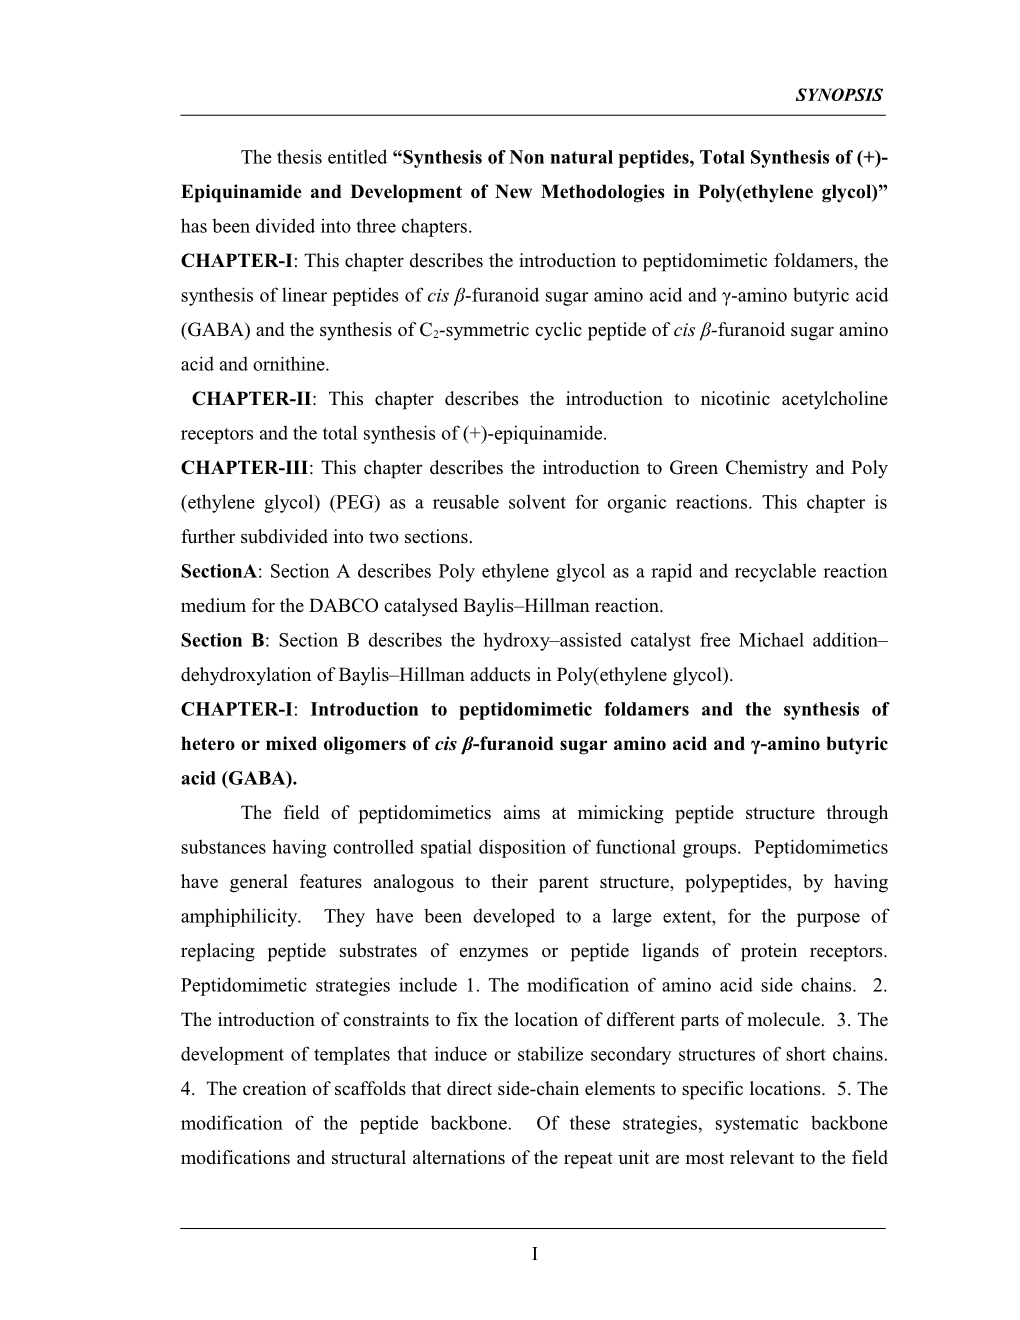 The Thesis Entitled Synthesis of Non Natural Peptides, Total Synthesis of (+)-Epiquinamide